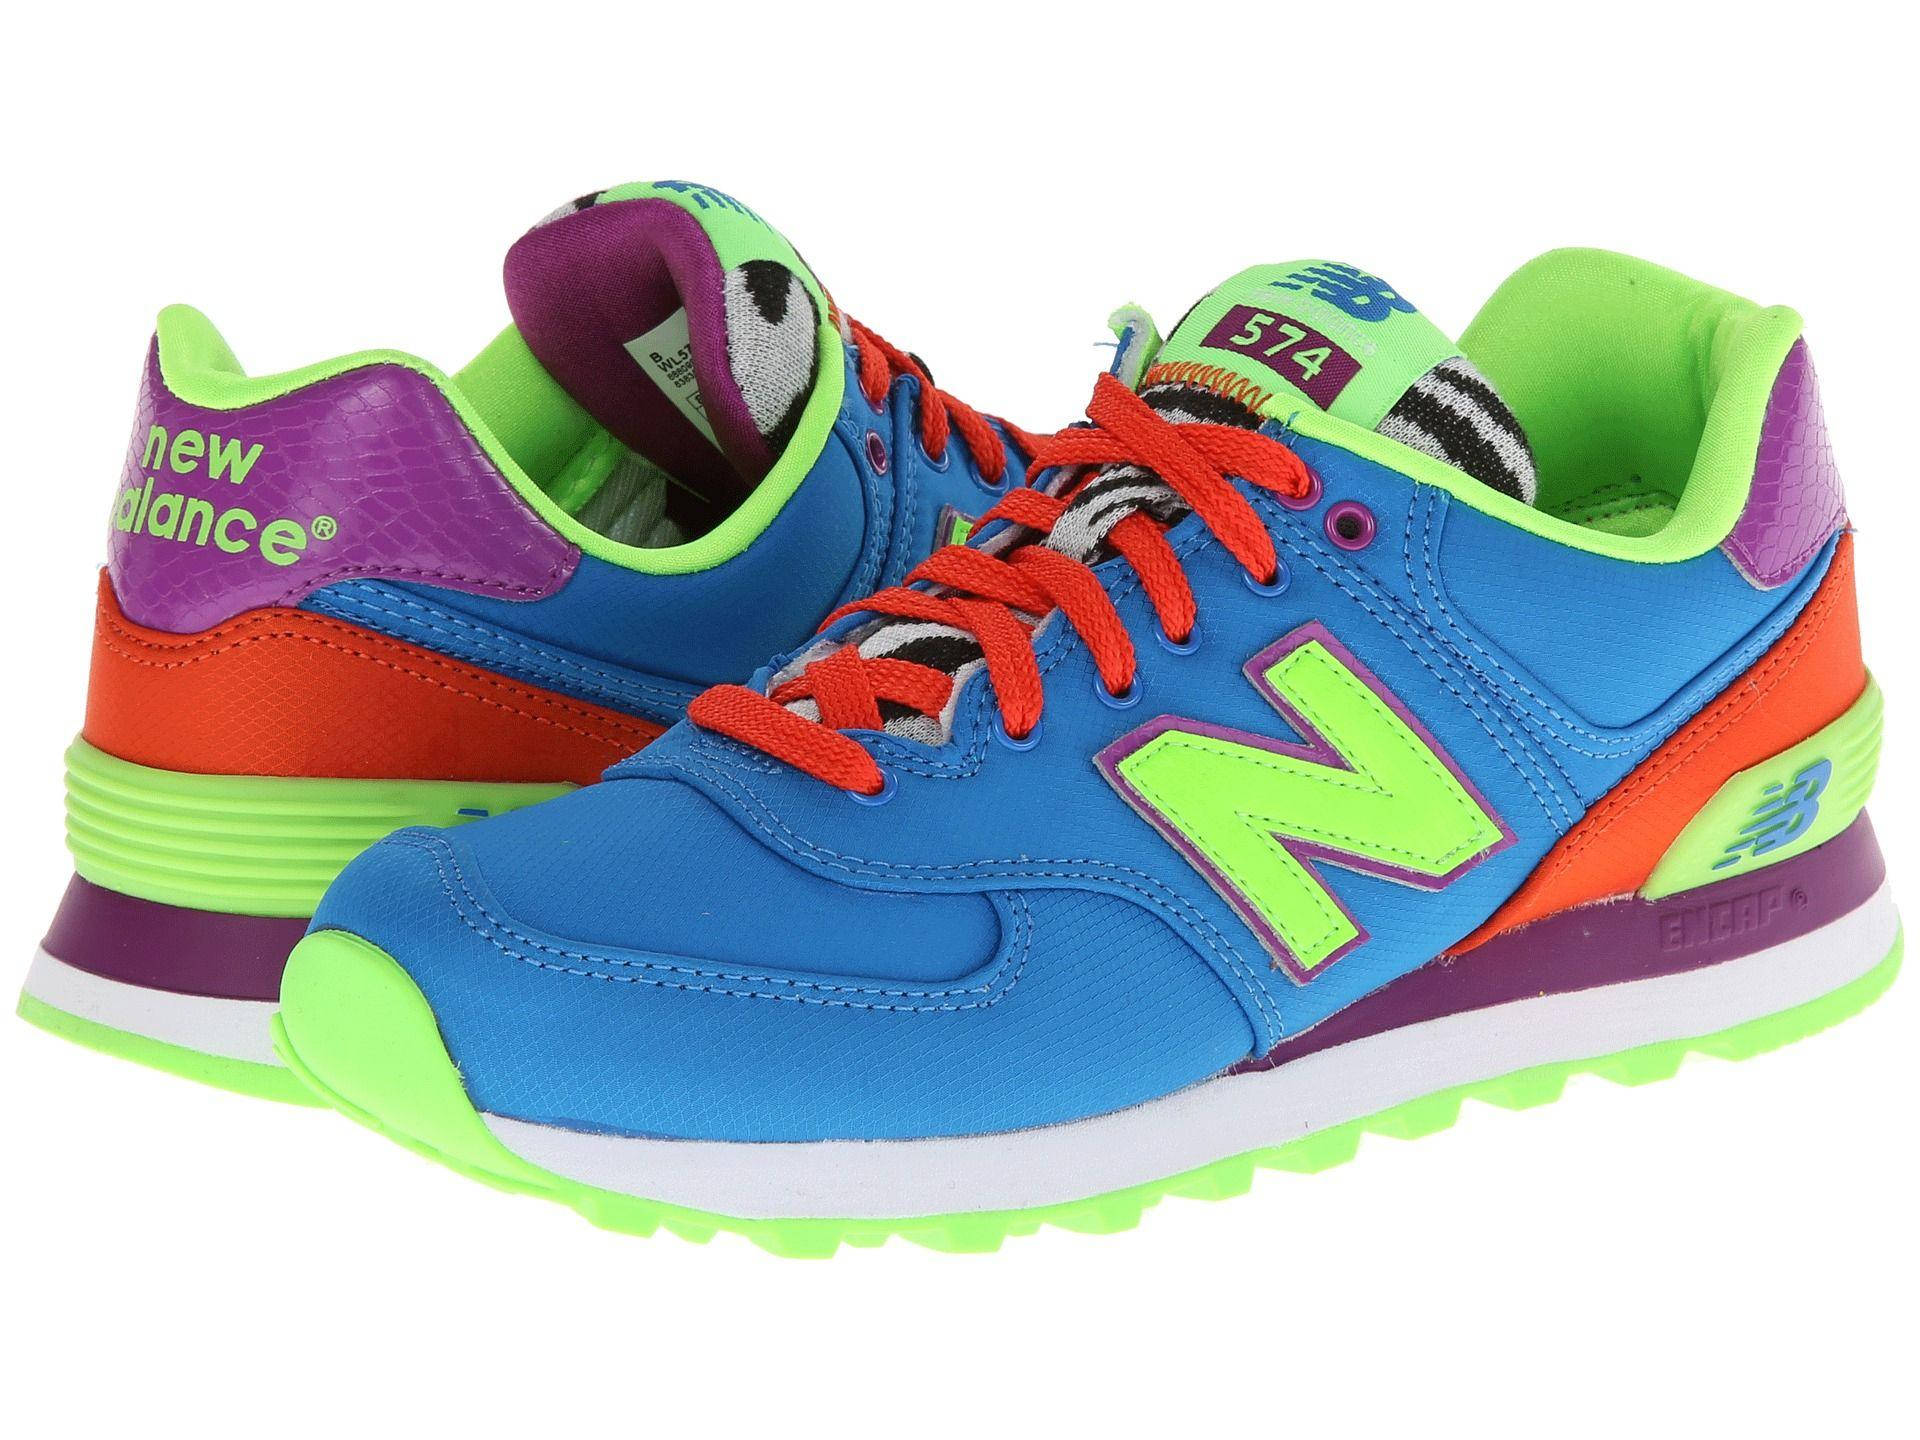 New Balance Neon Coloured Shoes Background